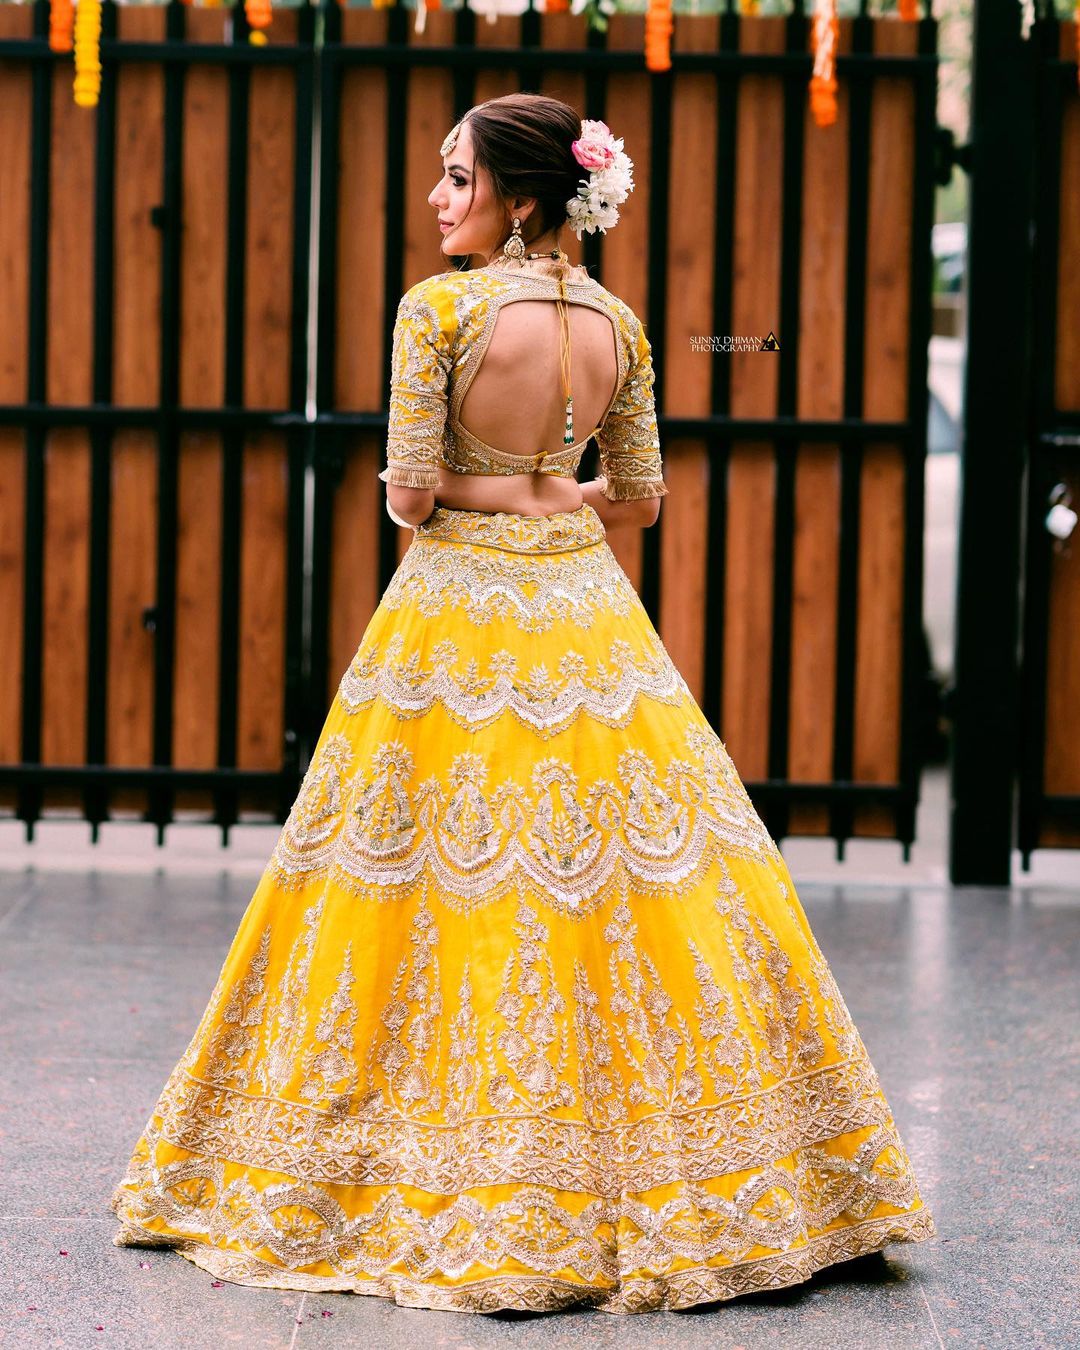 Manish Malhotra - Rejoice a timeless #nooraniyat in a delightful canary  yellow hue organza lehenga designed with all-over floral motif embroidery  accompanied by our tonal #Noor bodice and sheer scalloped drape!  #Nooraniyat - @